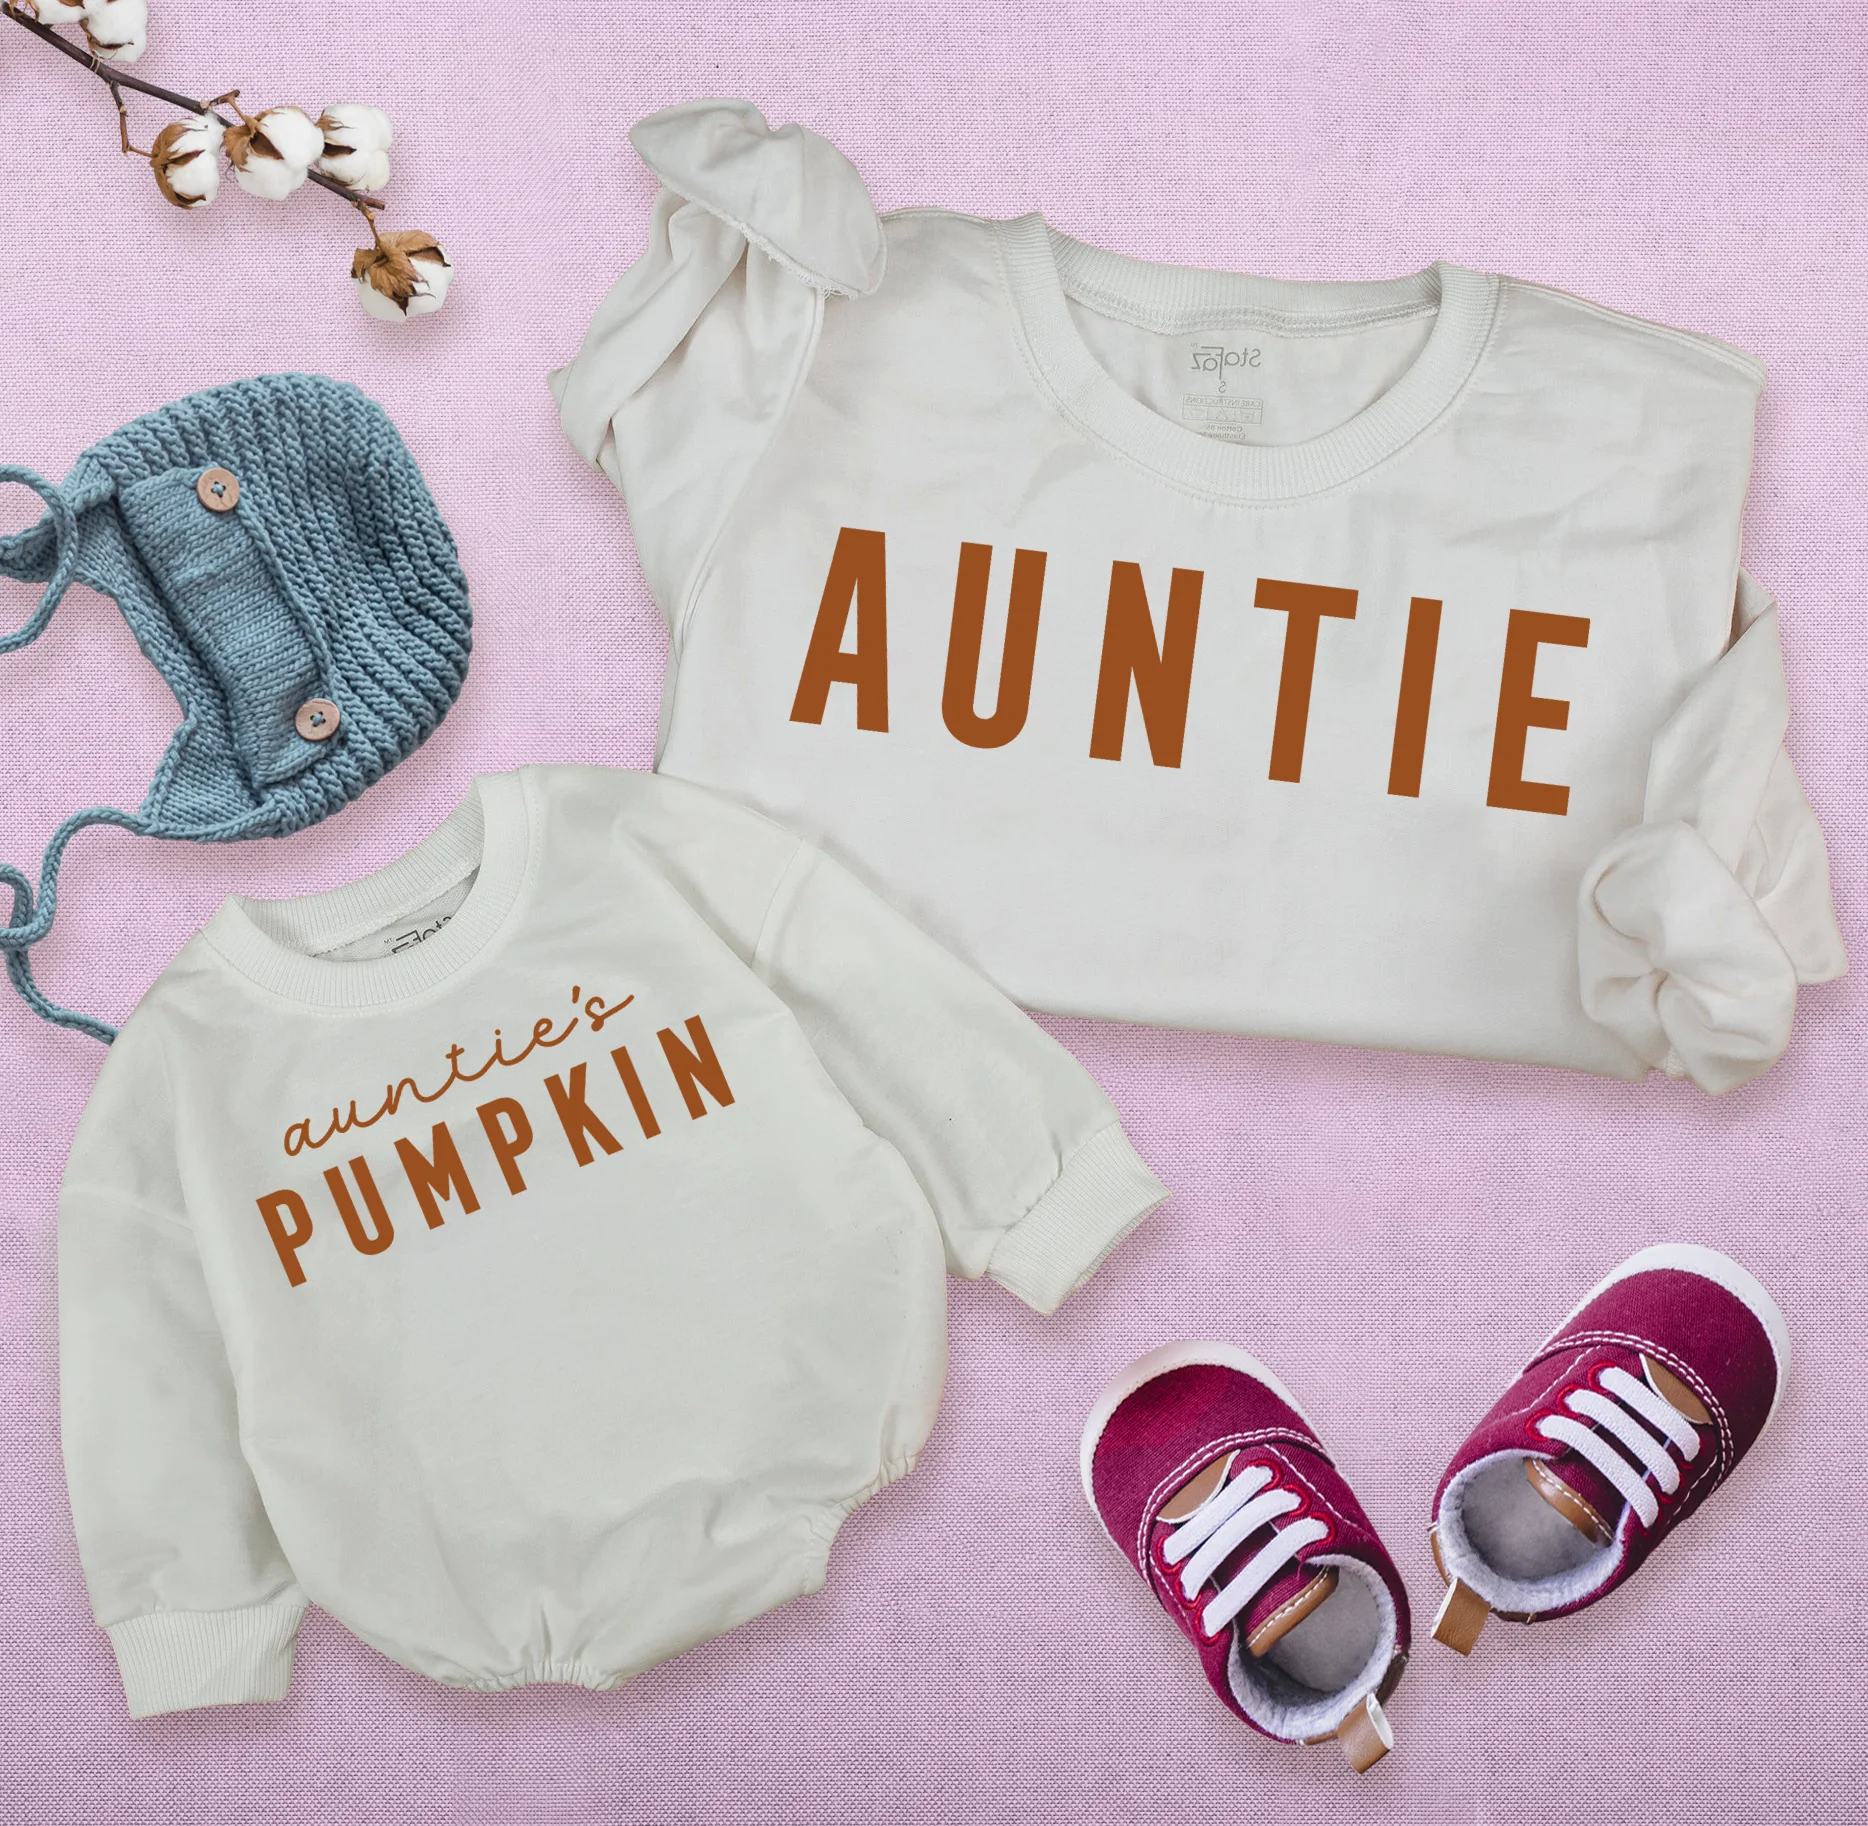 Auntie And Pumpkin Romper Matching - Cozy Fall Vibes!